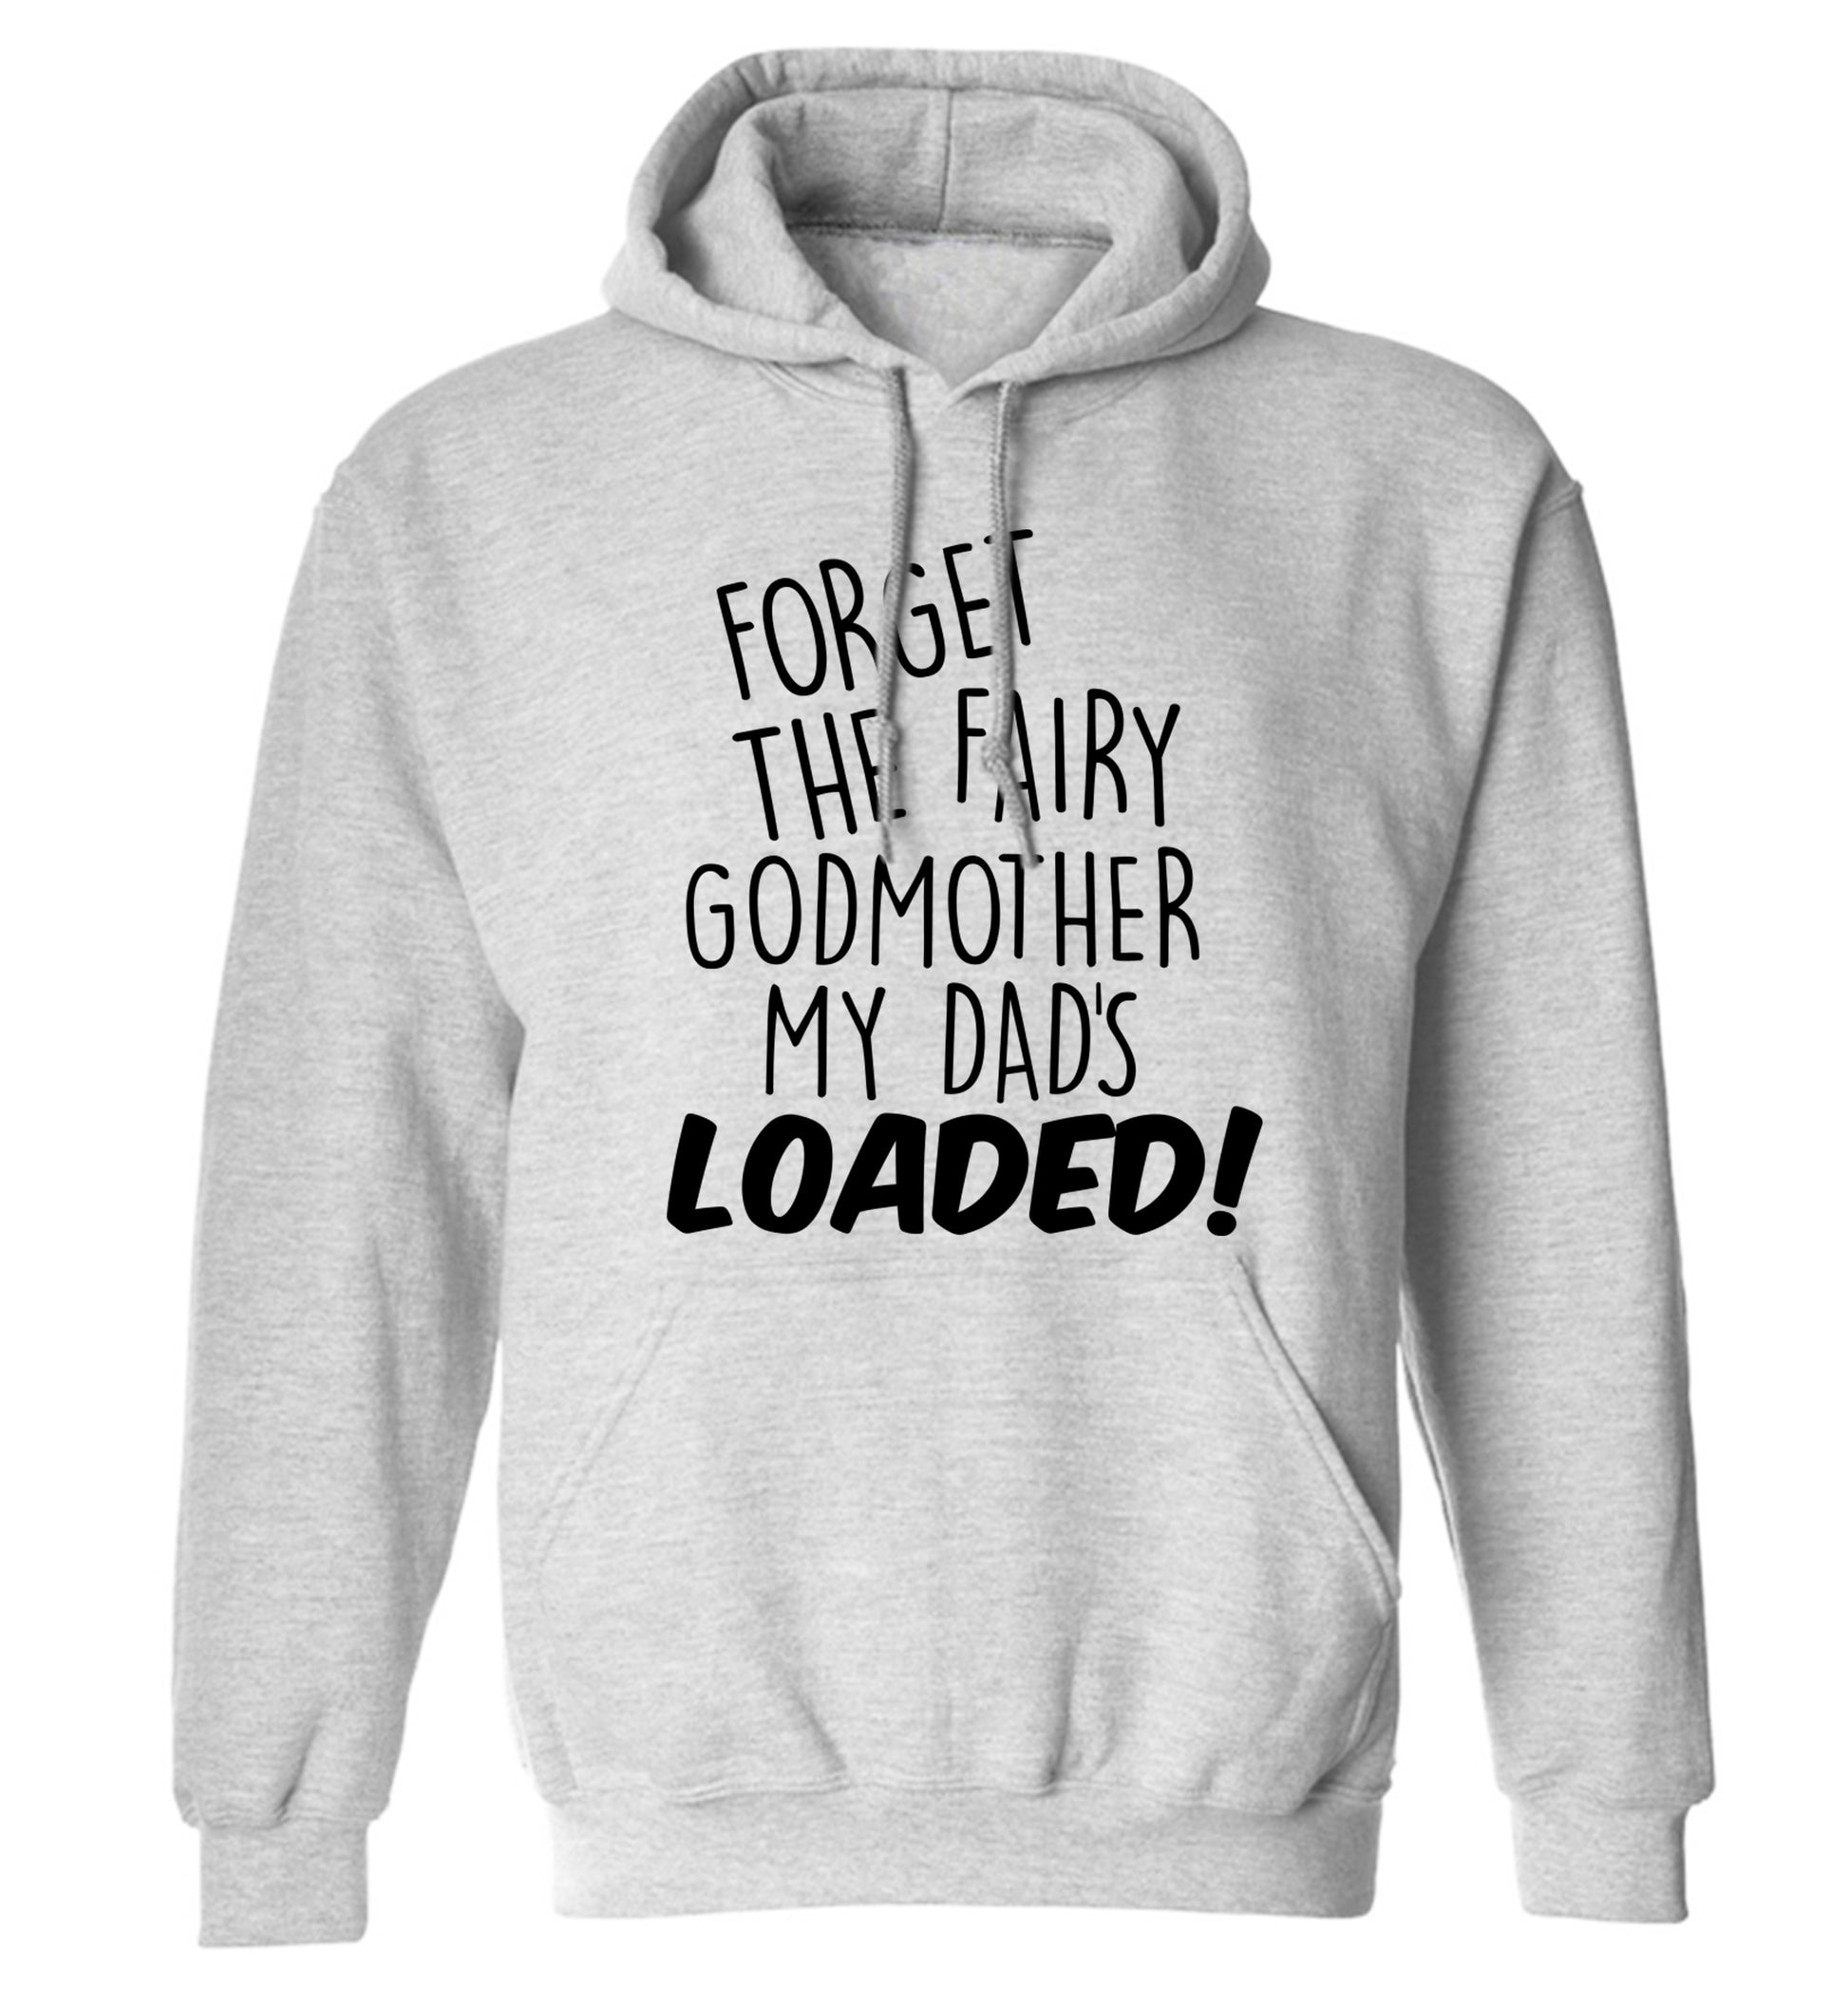 Forget the fairy godmother my dad's loaded adults unisex grey hoodie 2XL